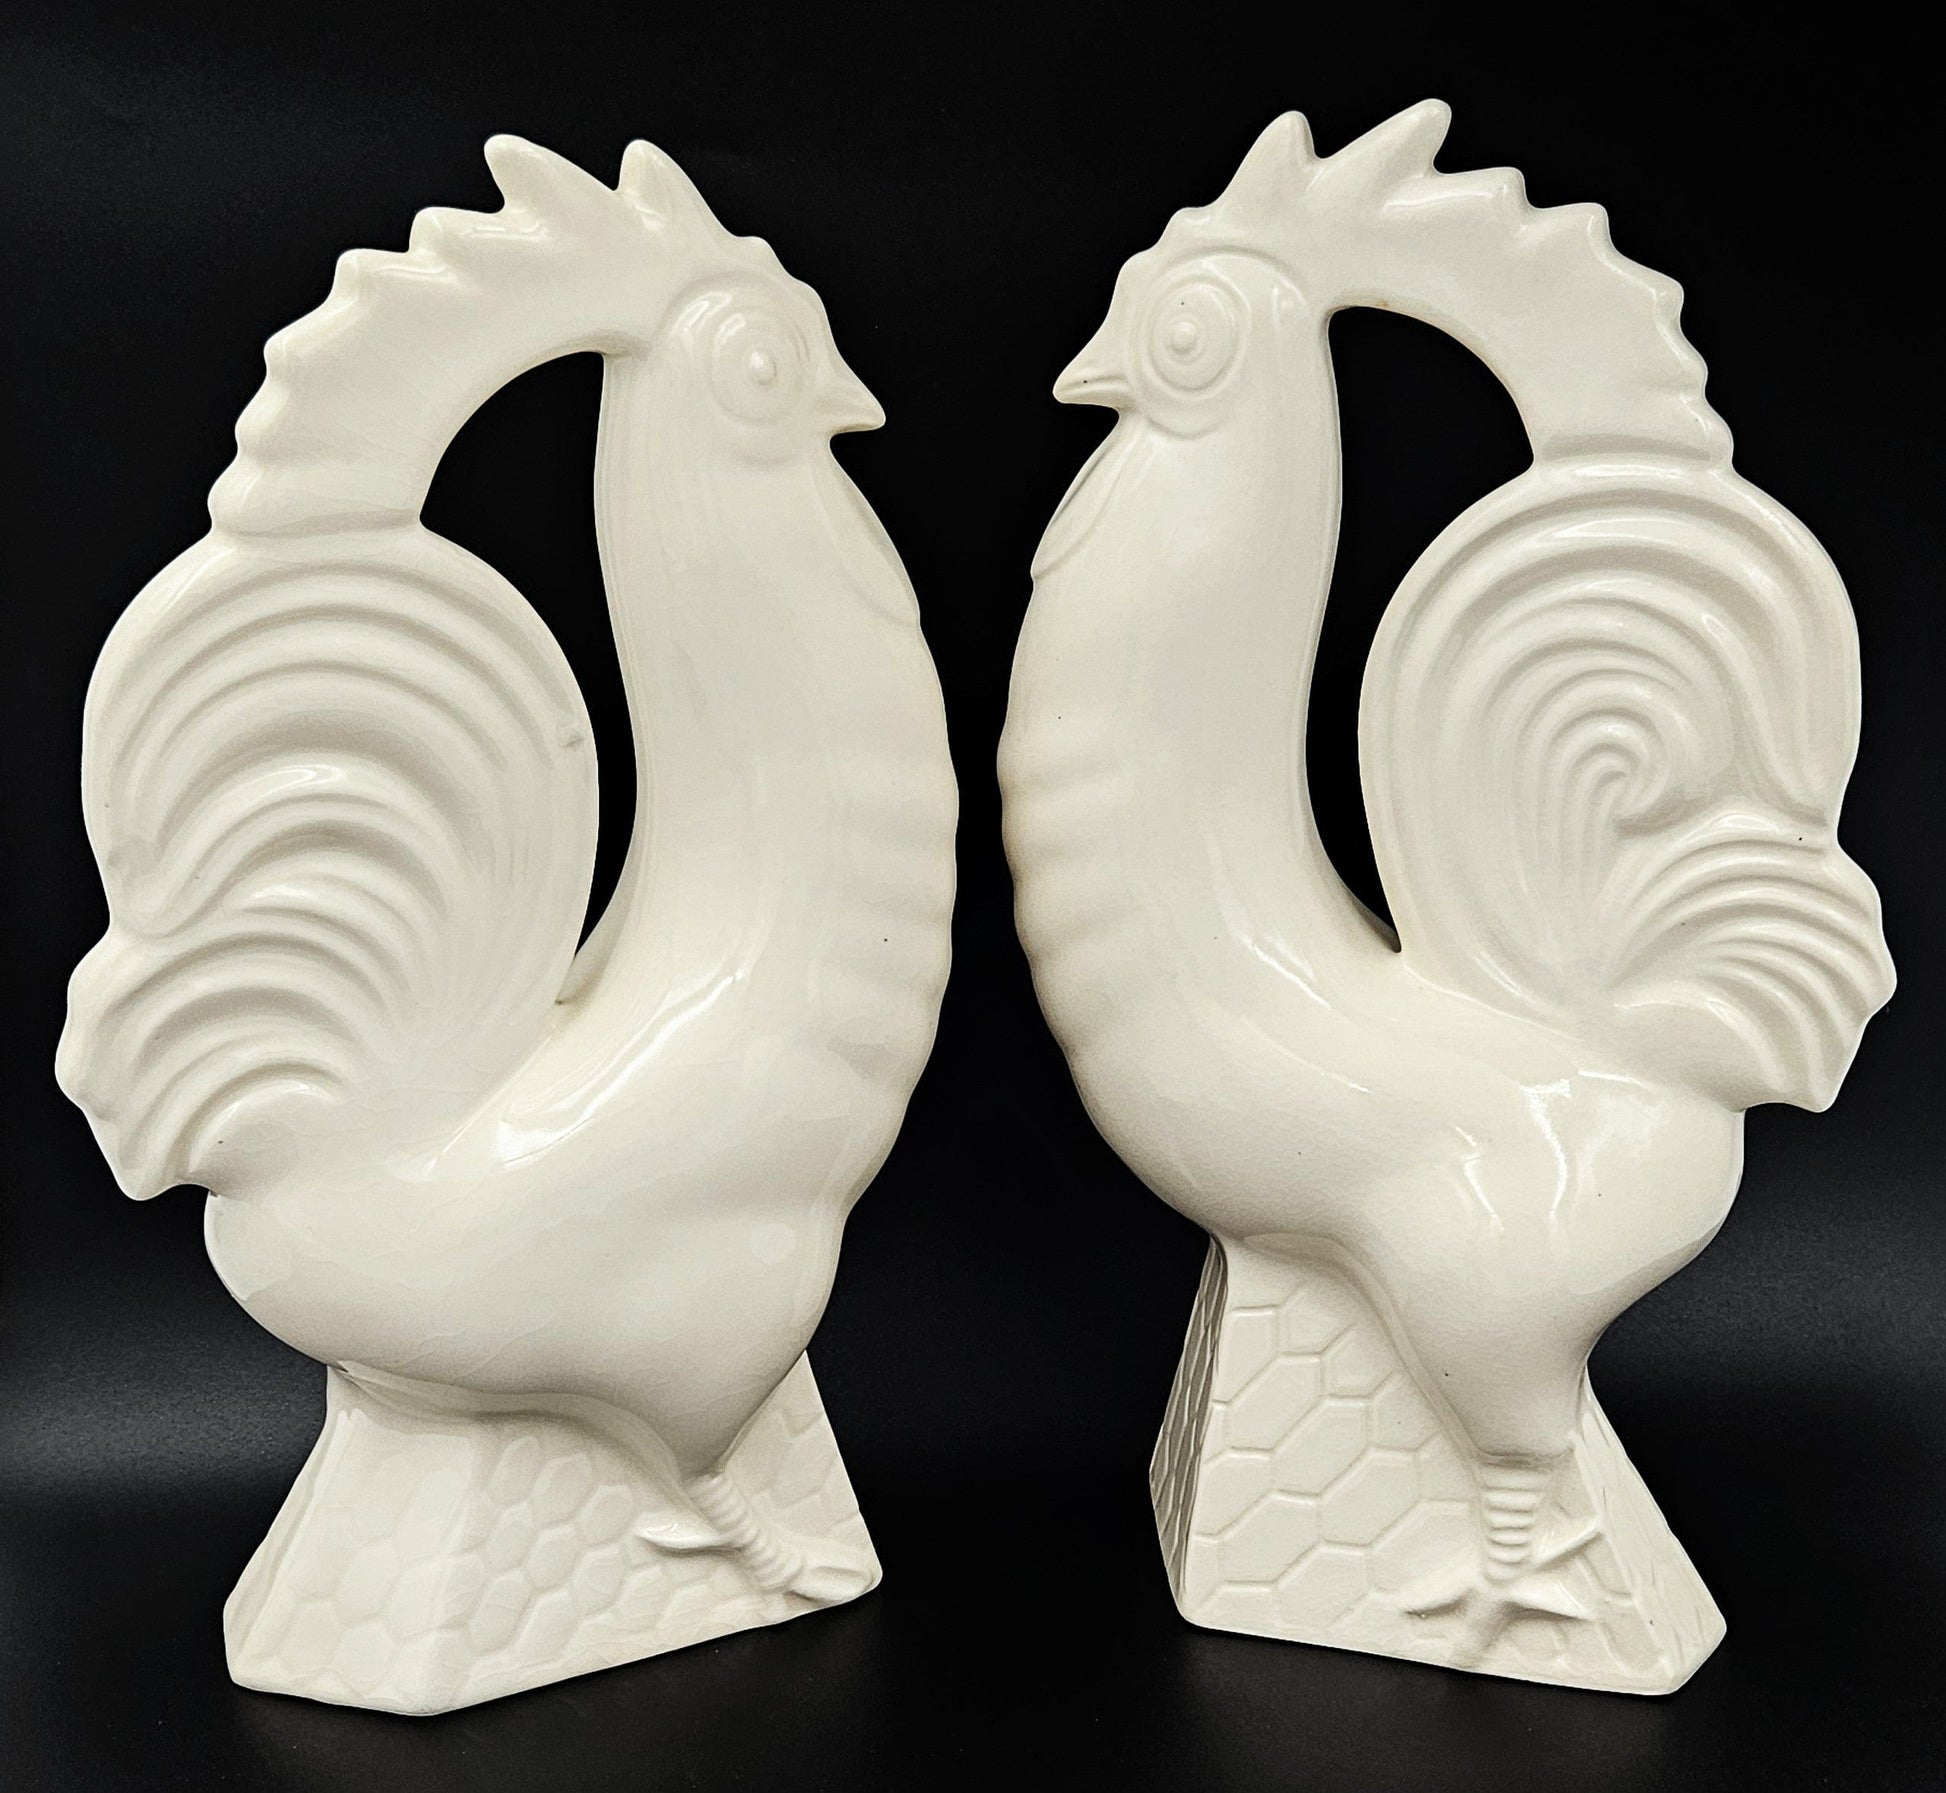 Erphila Bookends Vintage French Country Style Erphila Cream Colored Ceramic Rooster Bookends